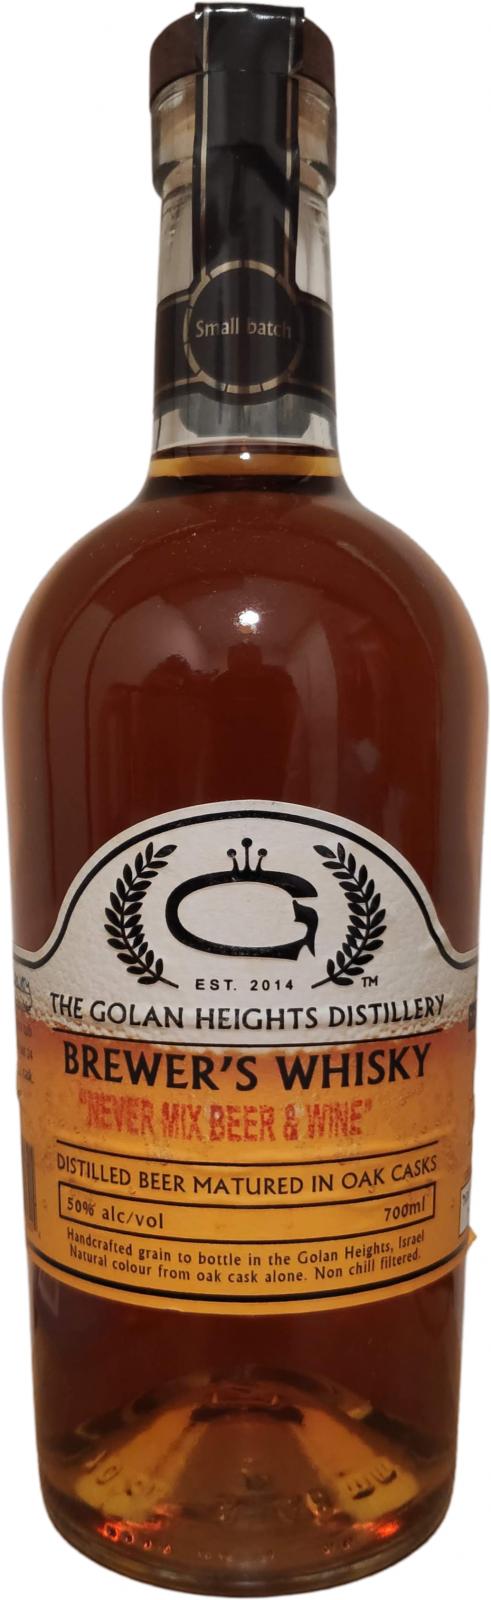 Golani Brewer's Whisky Oak and Beer Casks 50% 700ml